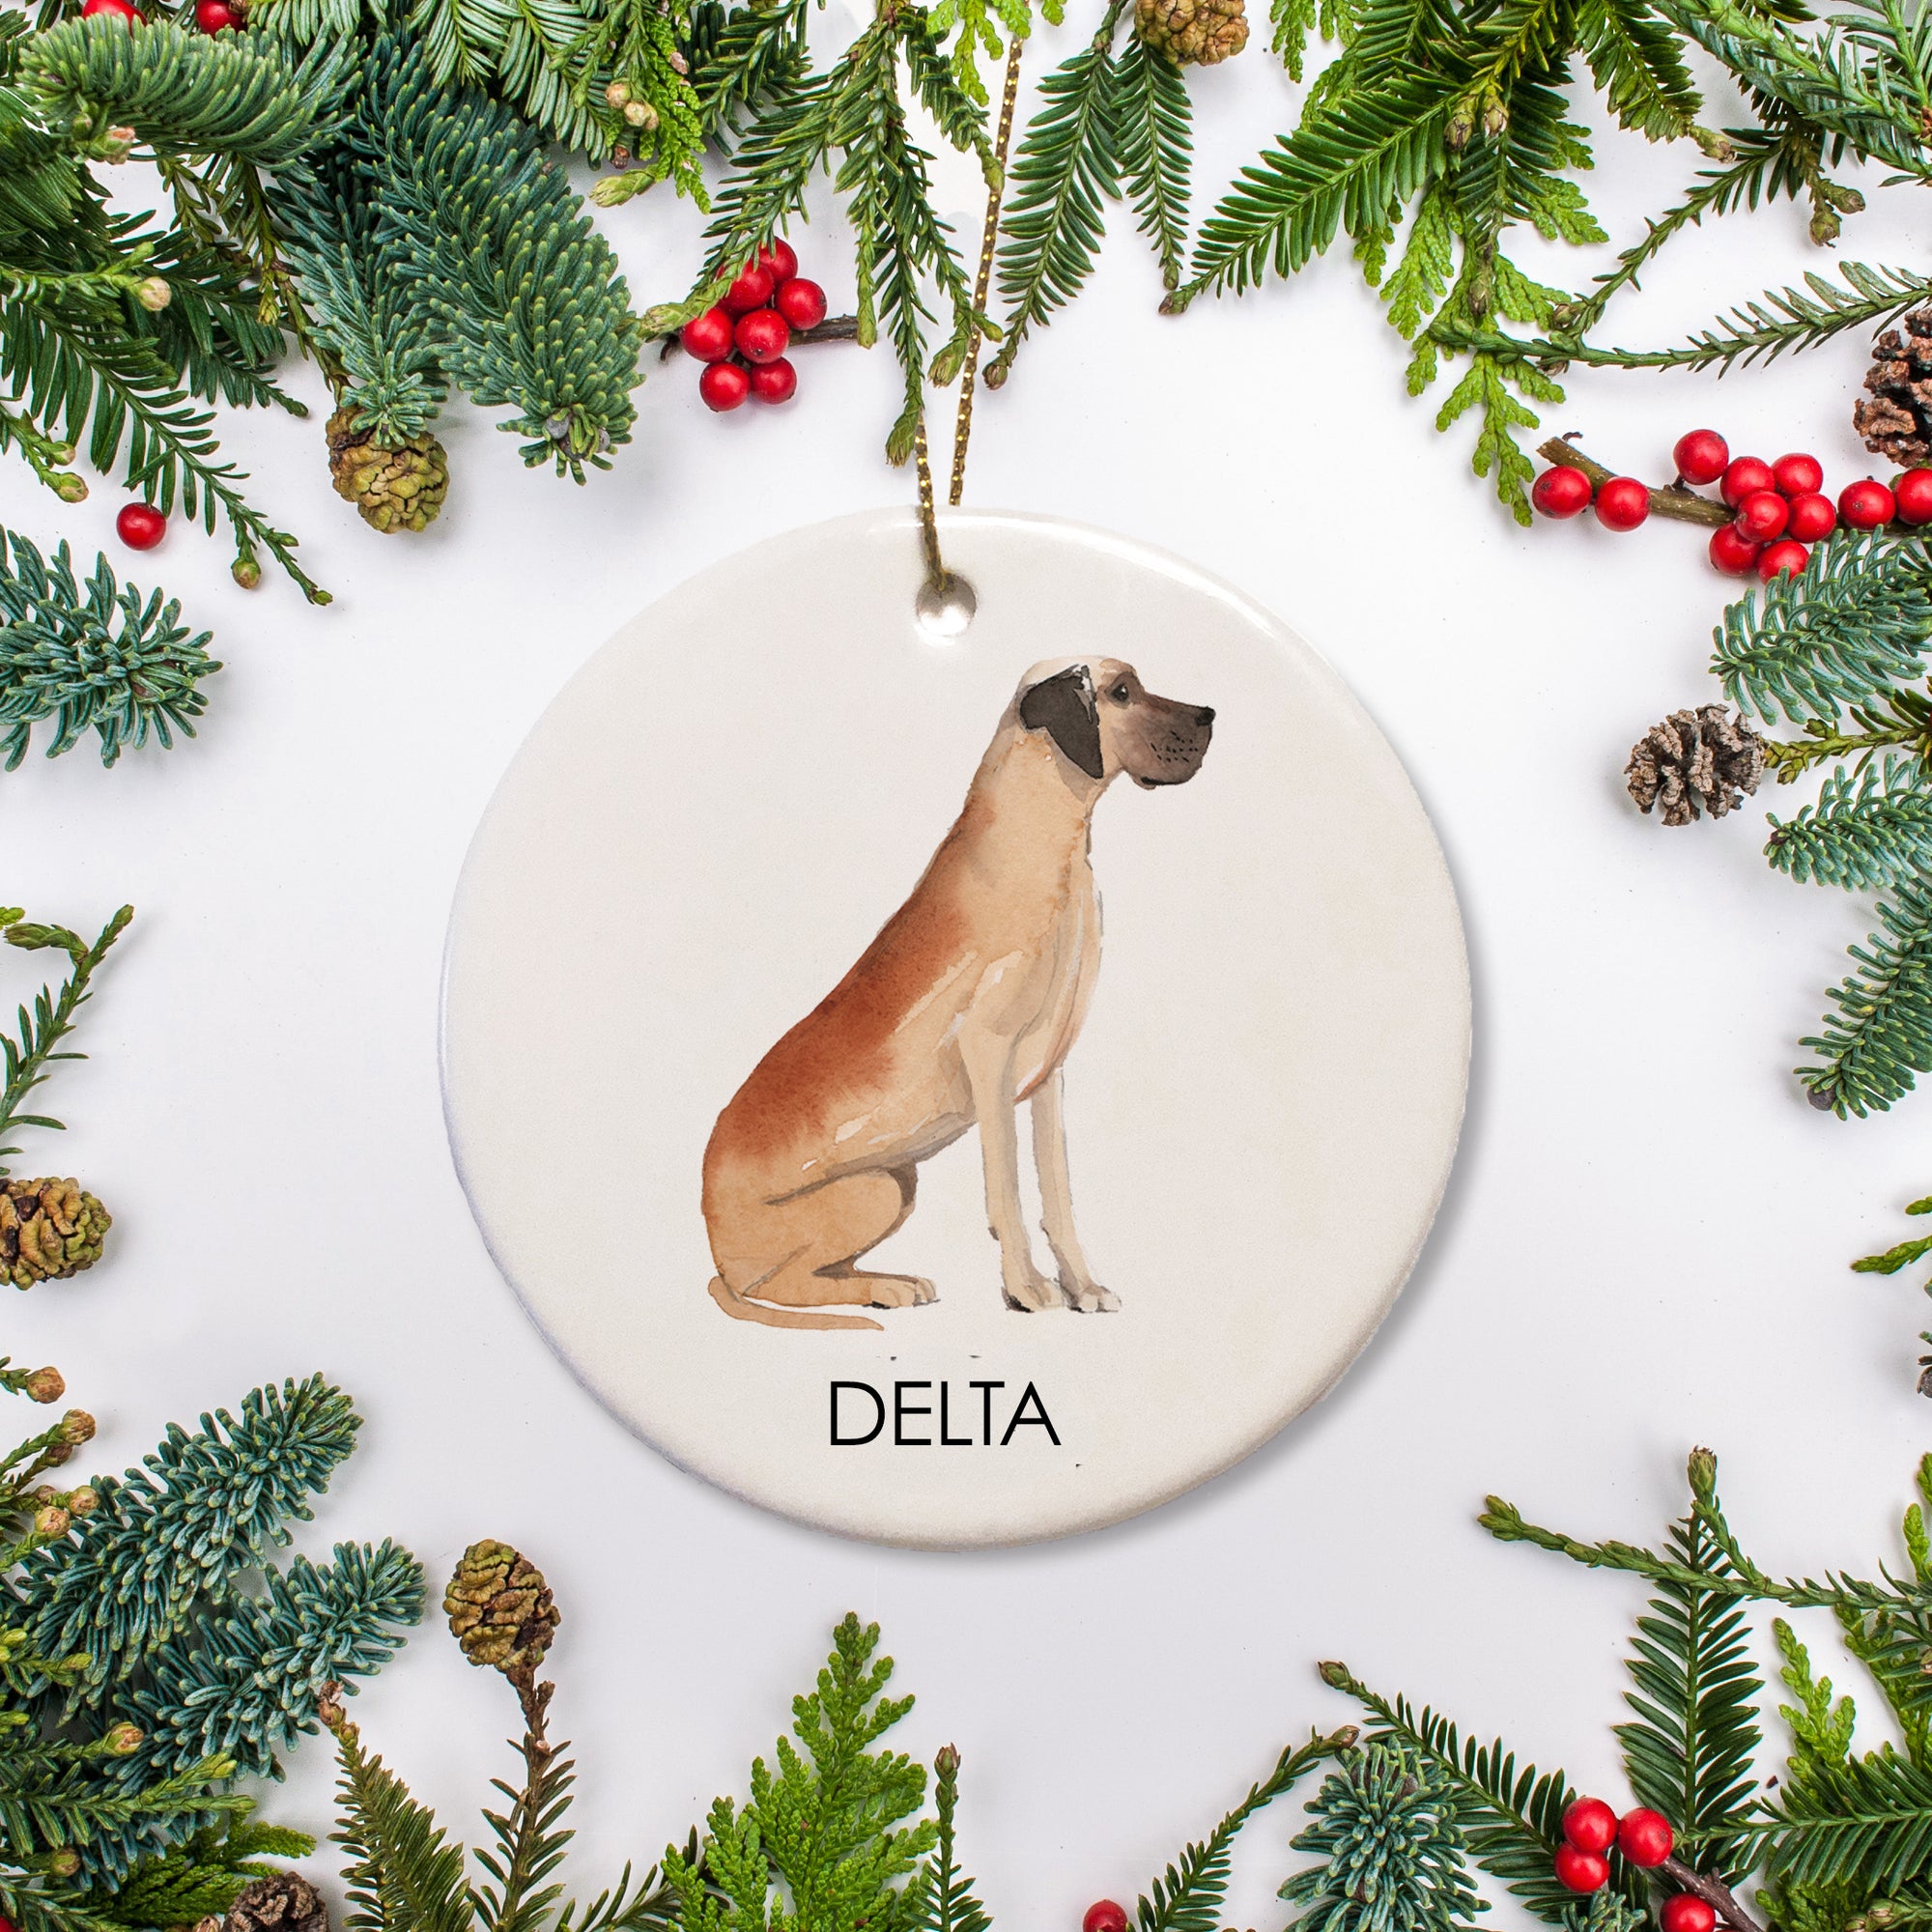 This custom Great Dane Christmas ornament features a fawn dane is personalized with your dog's name. It is an excellent way to celebrate your puppy's first Christmas, or to include your family pet in your Christmas tree decor